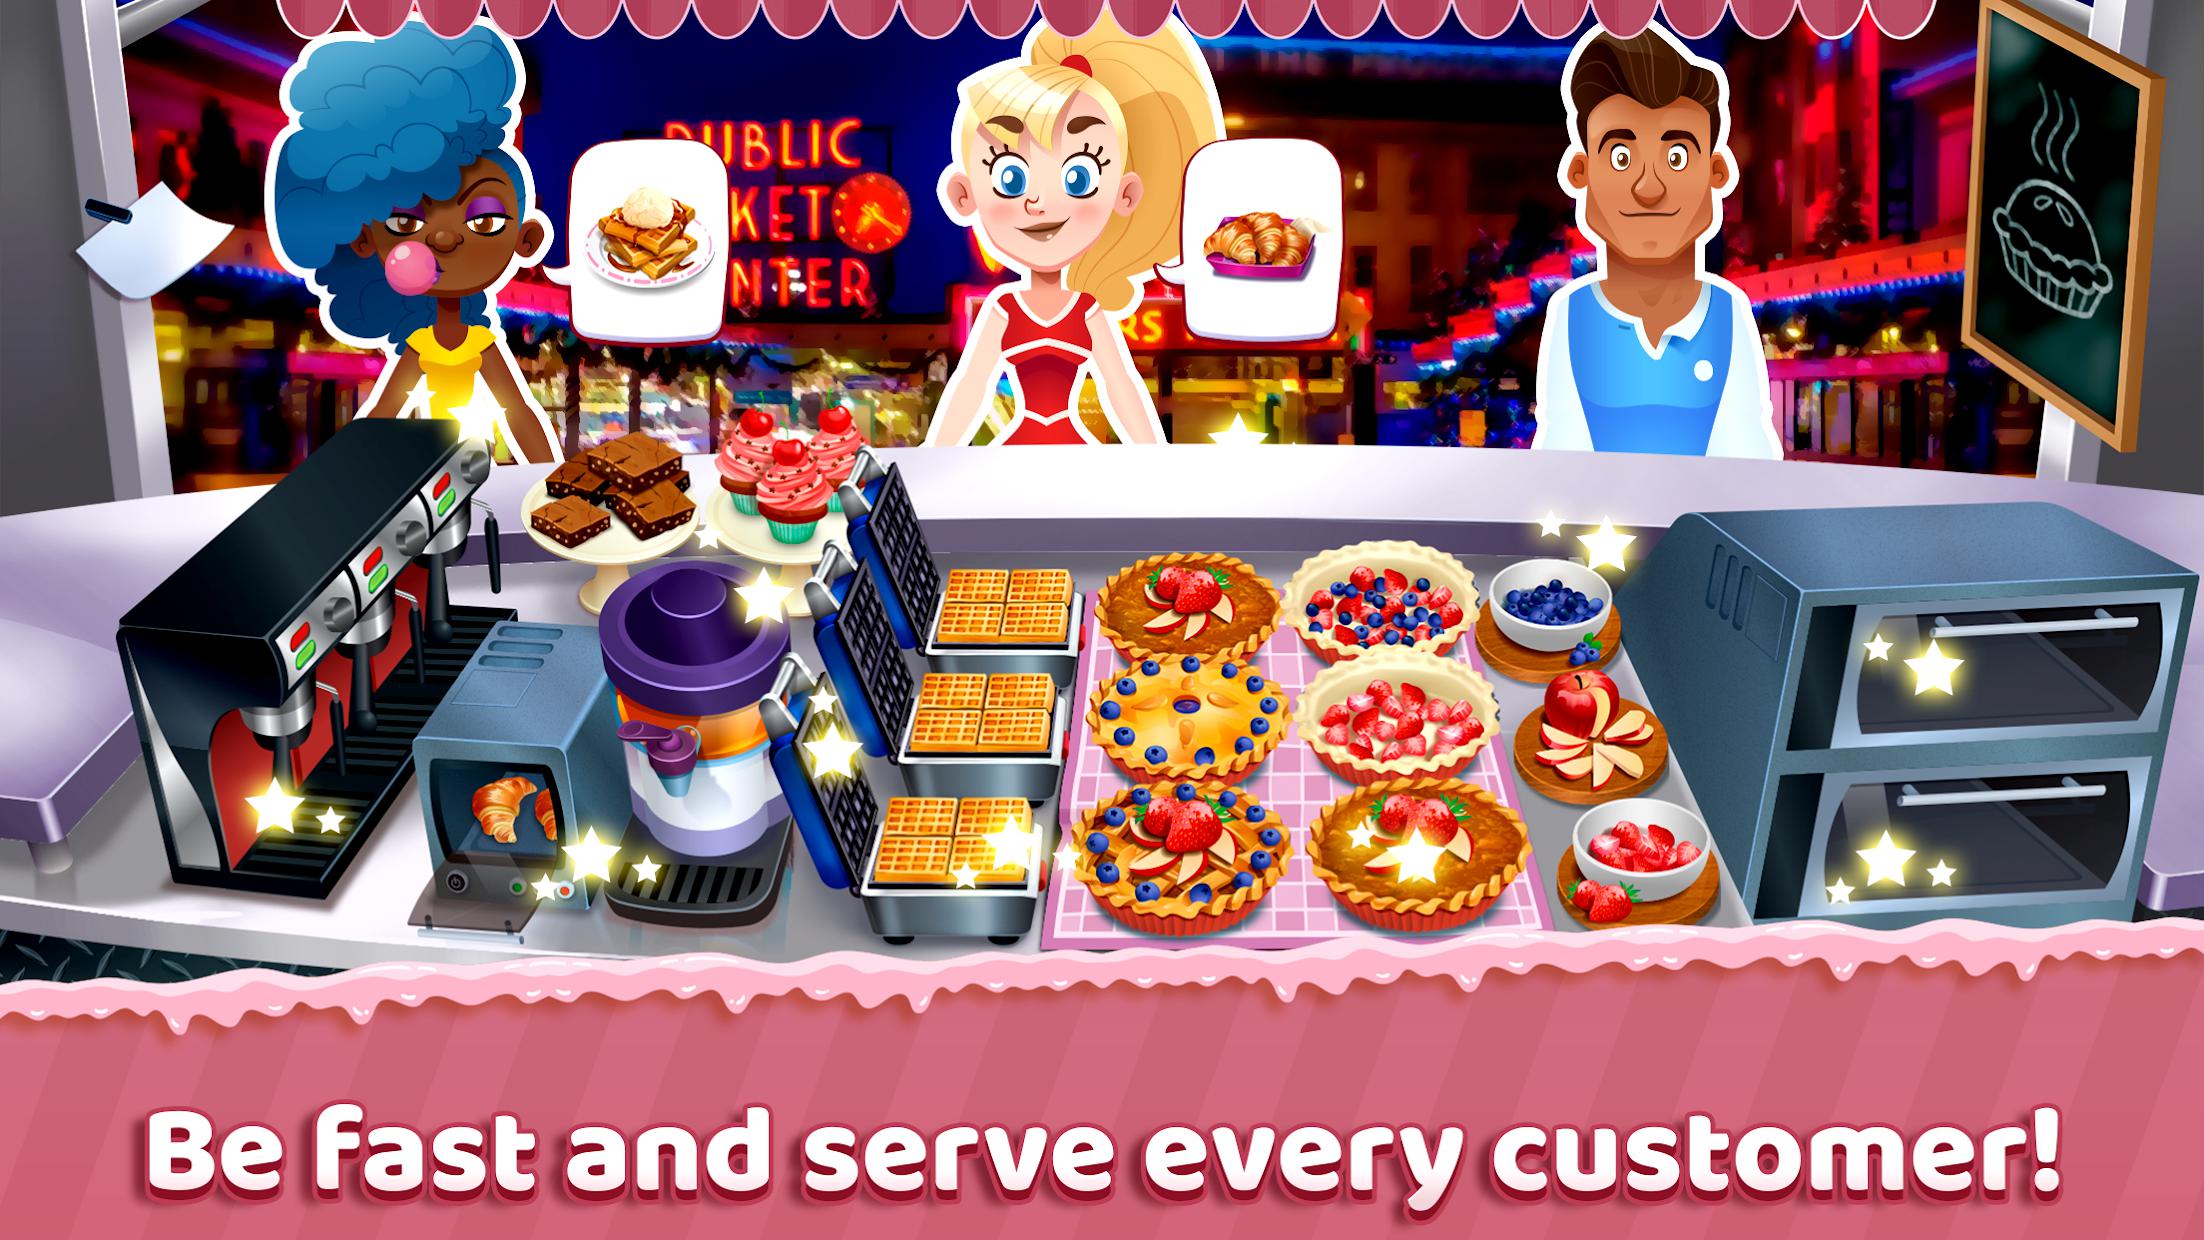 Seattle Pie Truck - Fast Food Cooking Game_游戏简介_图2